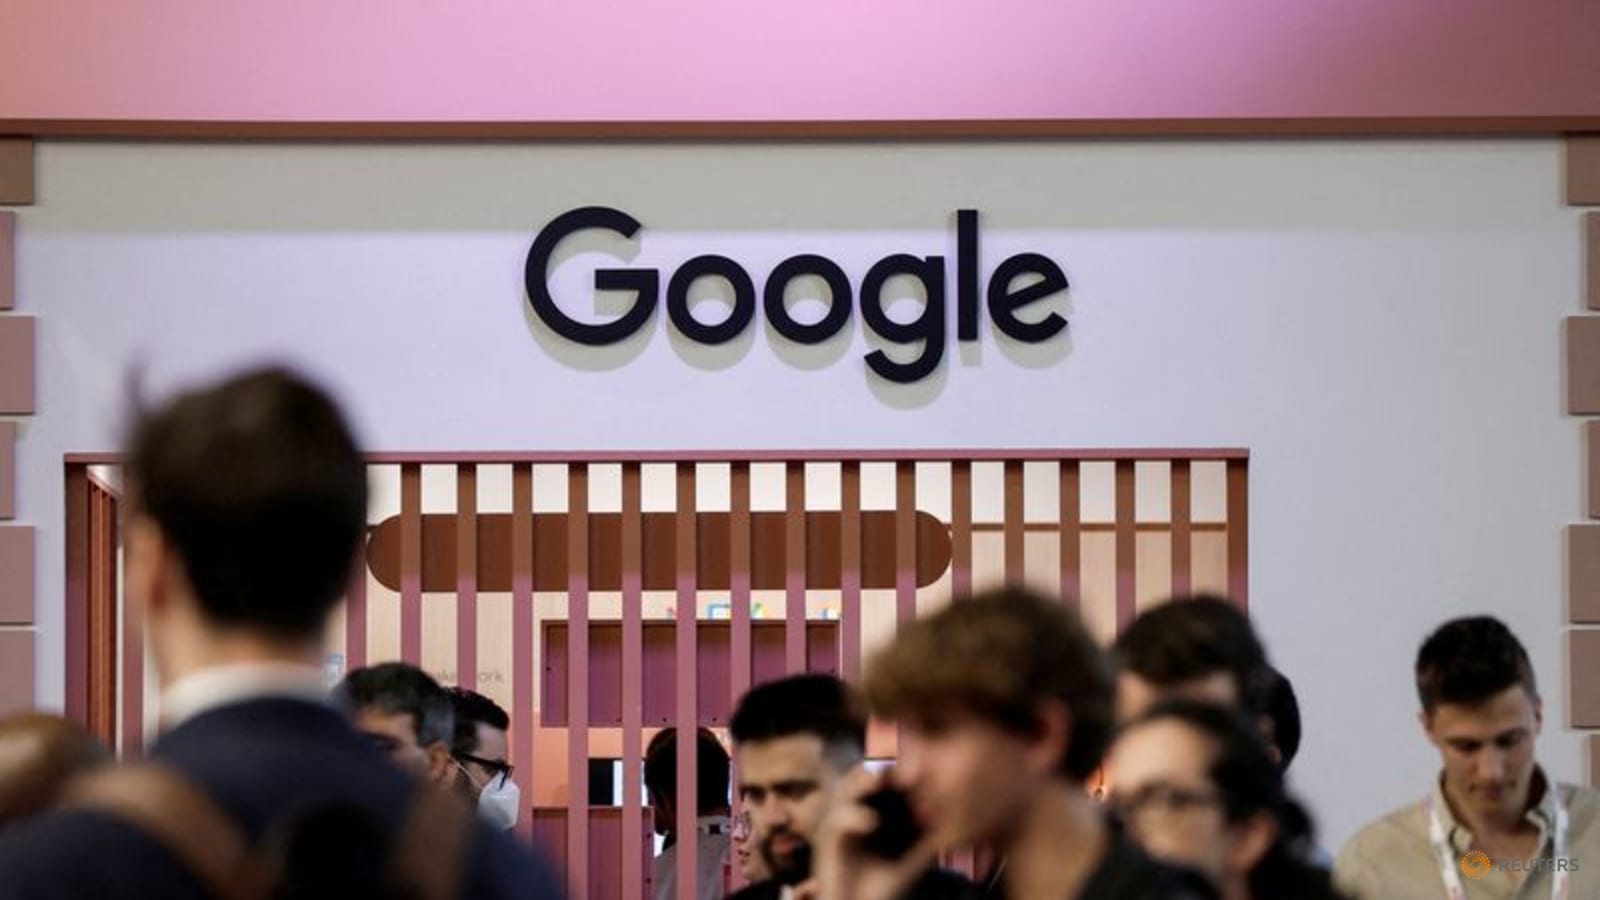 Exclusive: Google hit with antitrust complaint by Danish job search rival